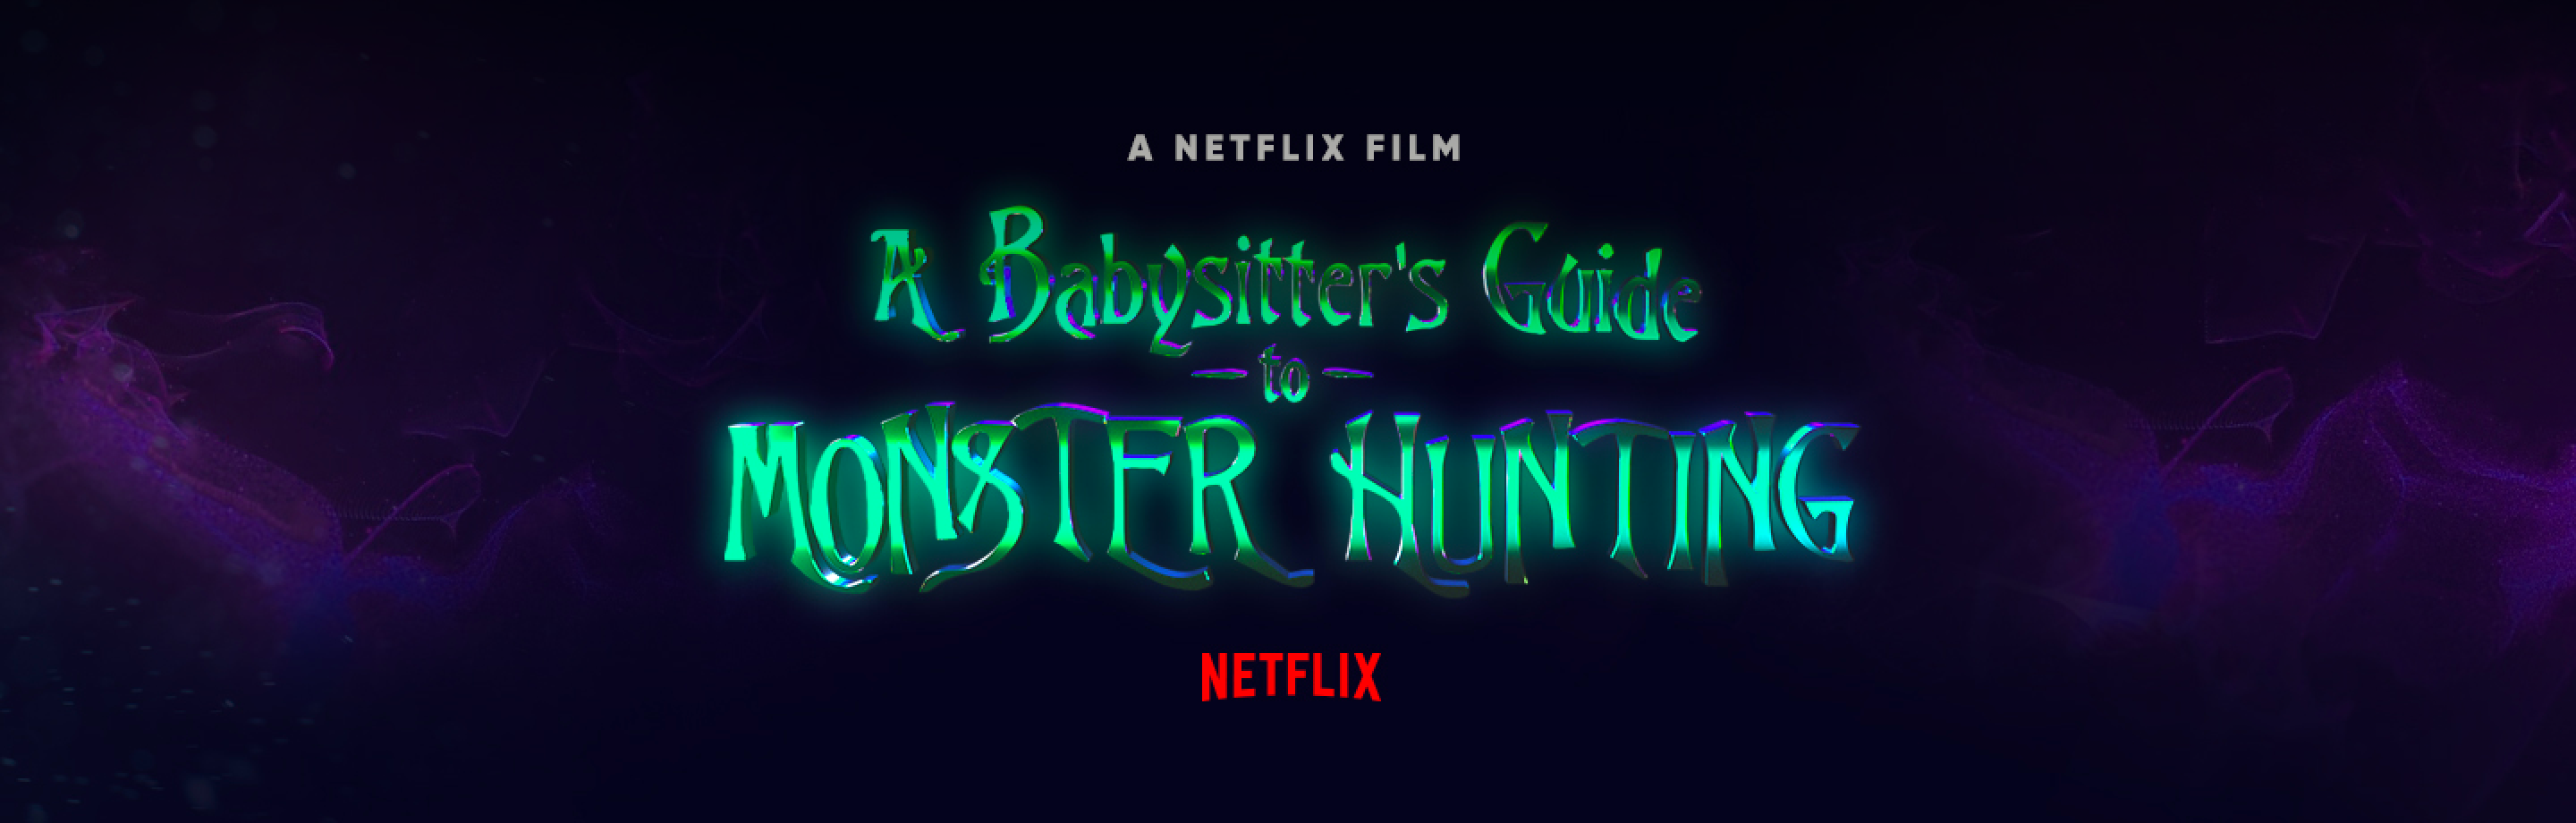 Netflix Babysitter's Guide project cover